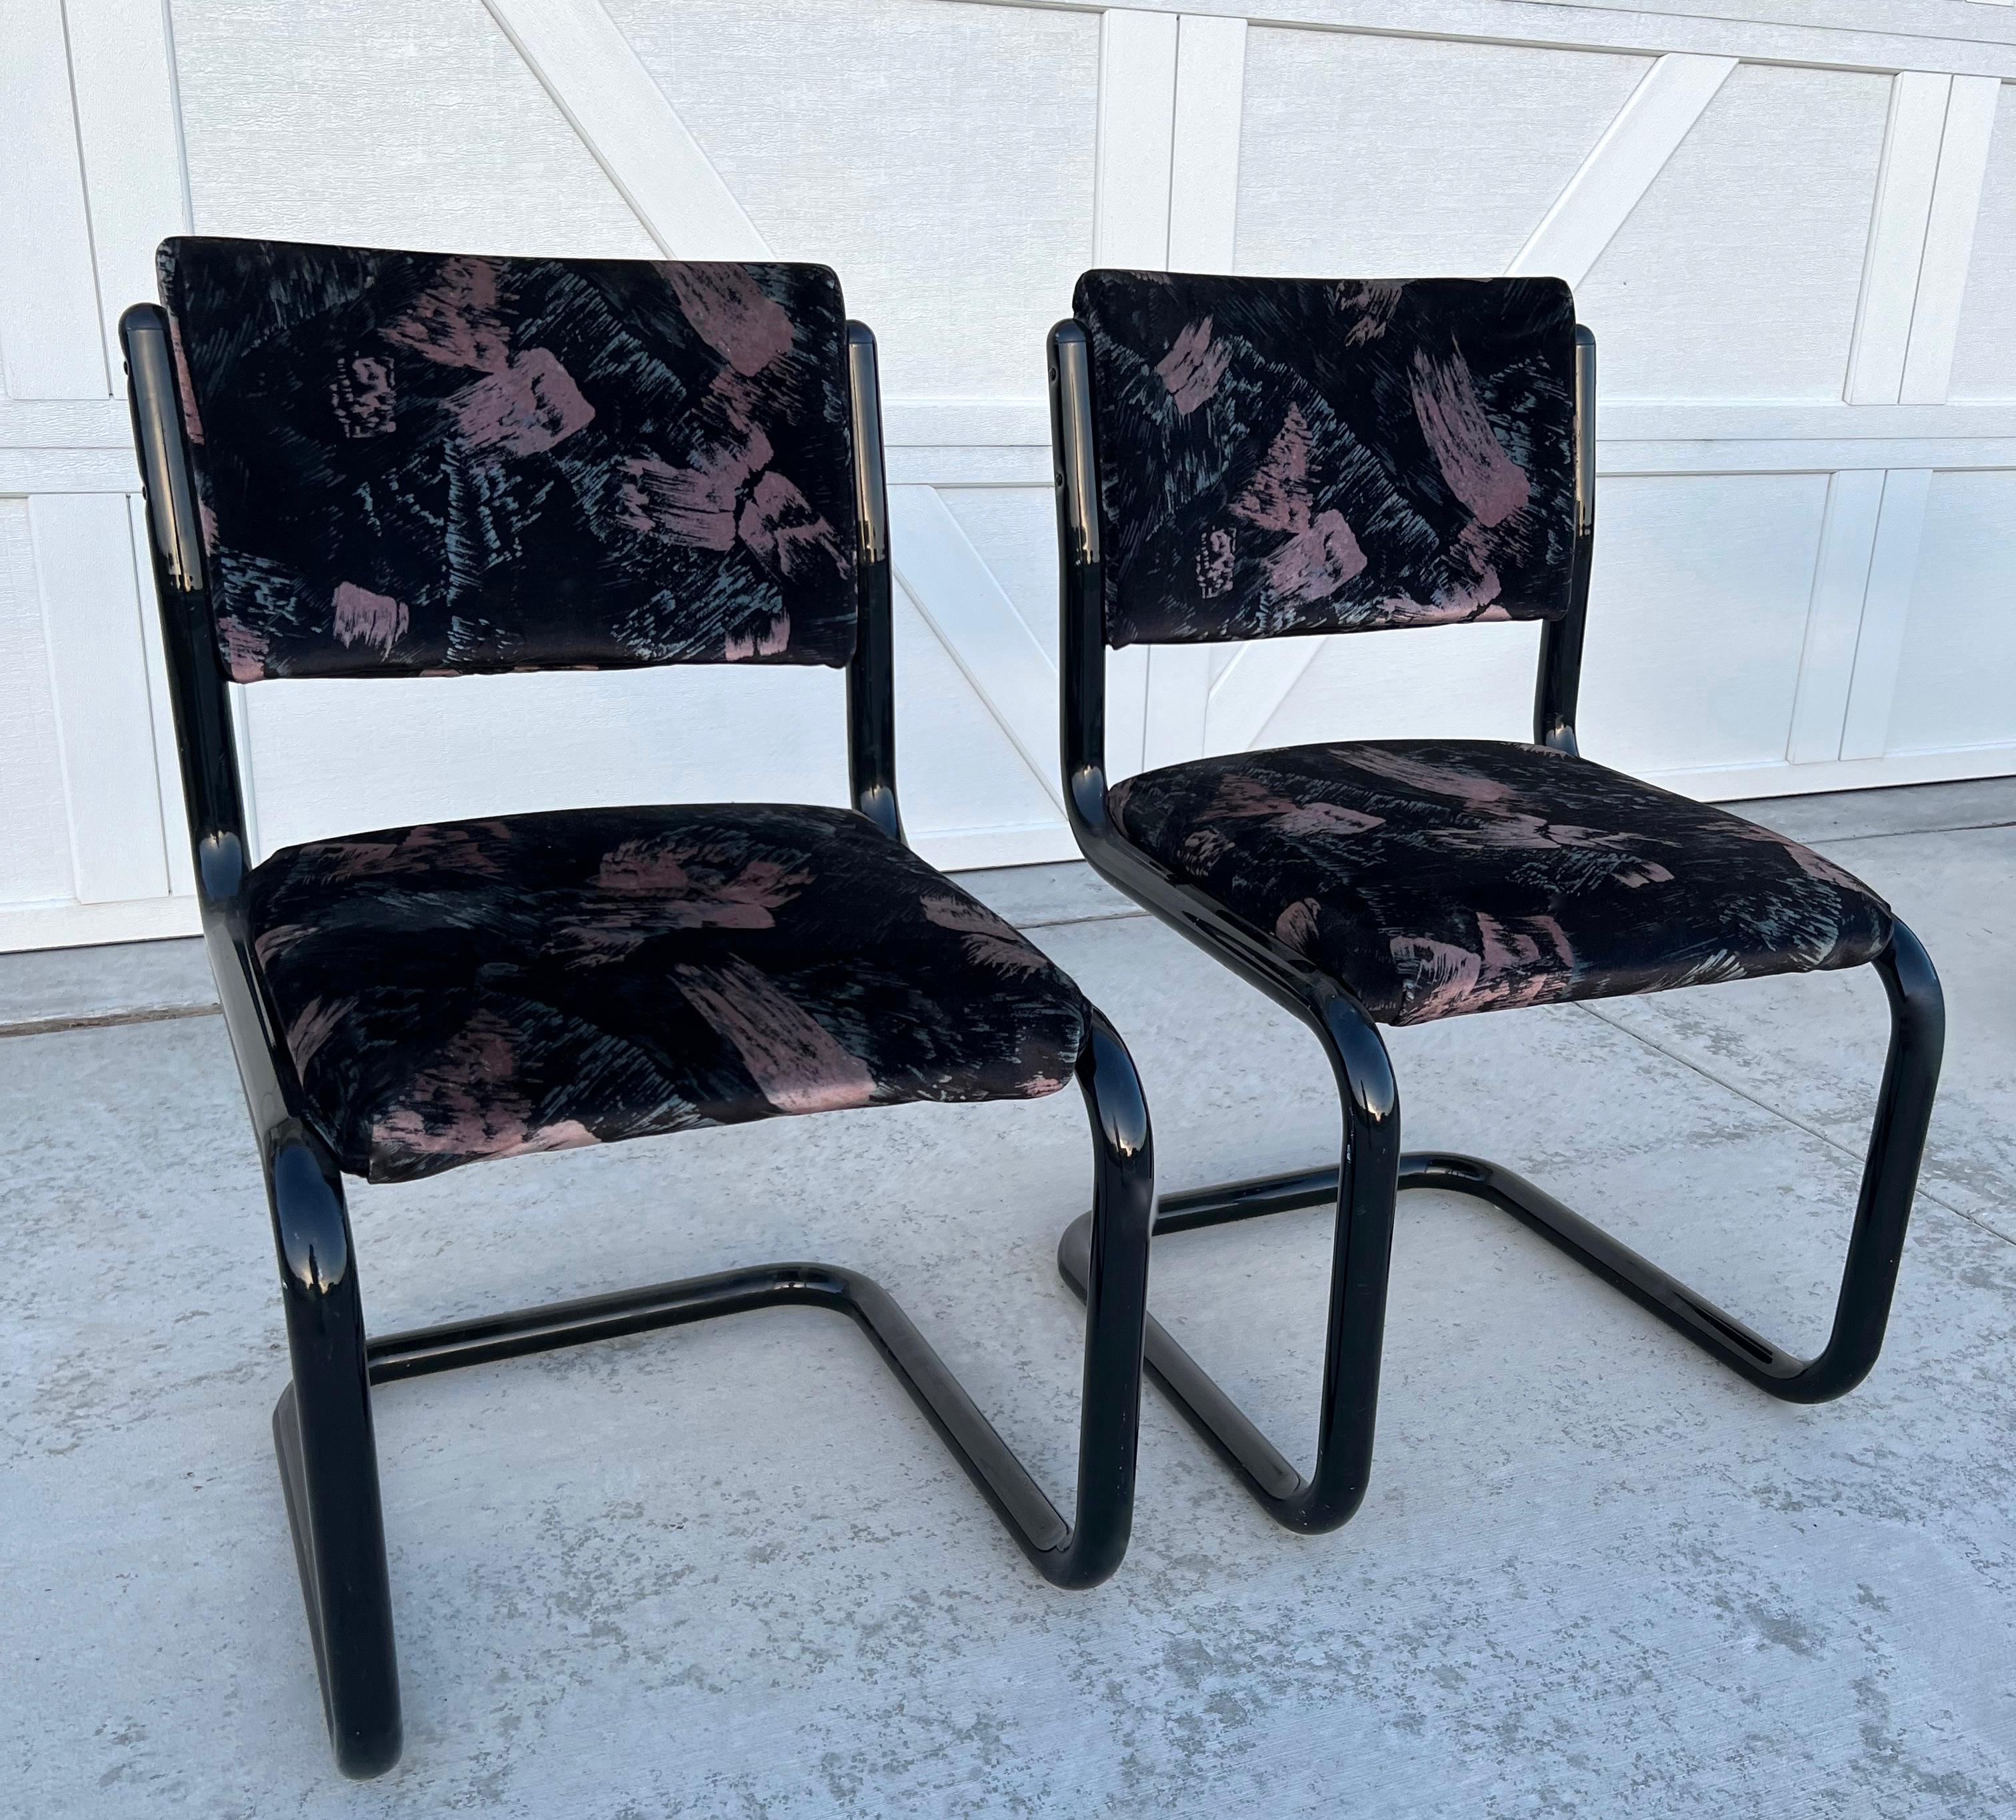 Four 1980s Post Modern Black Tubular Cantilever Chairs by Douglas Furniture  In Good Condition For Sale In Draper, UT